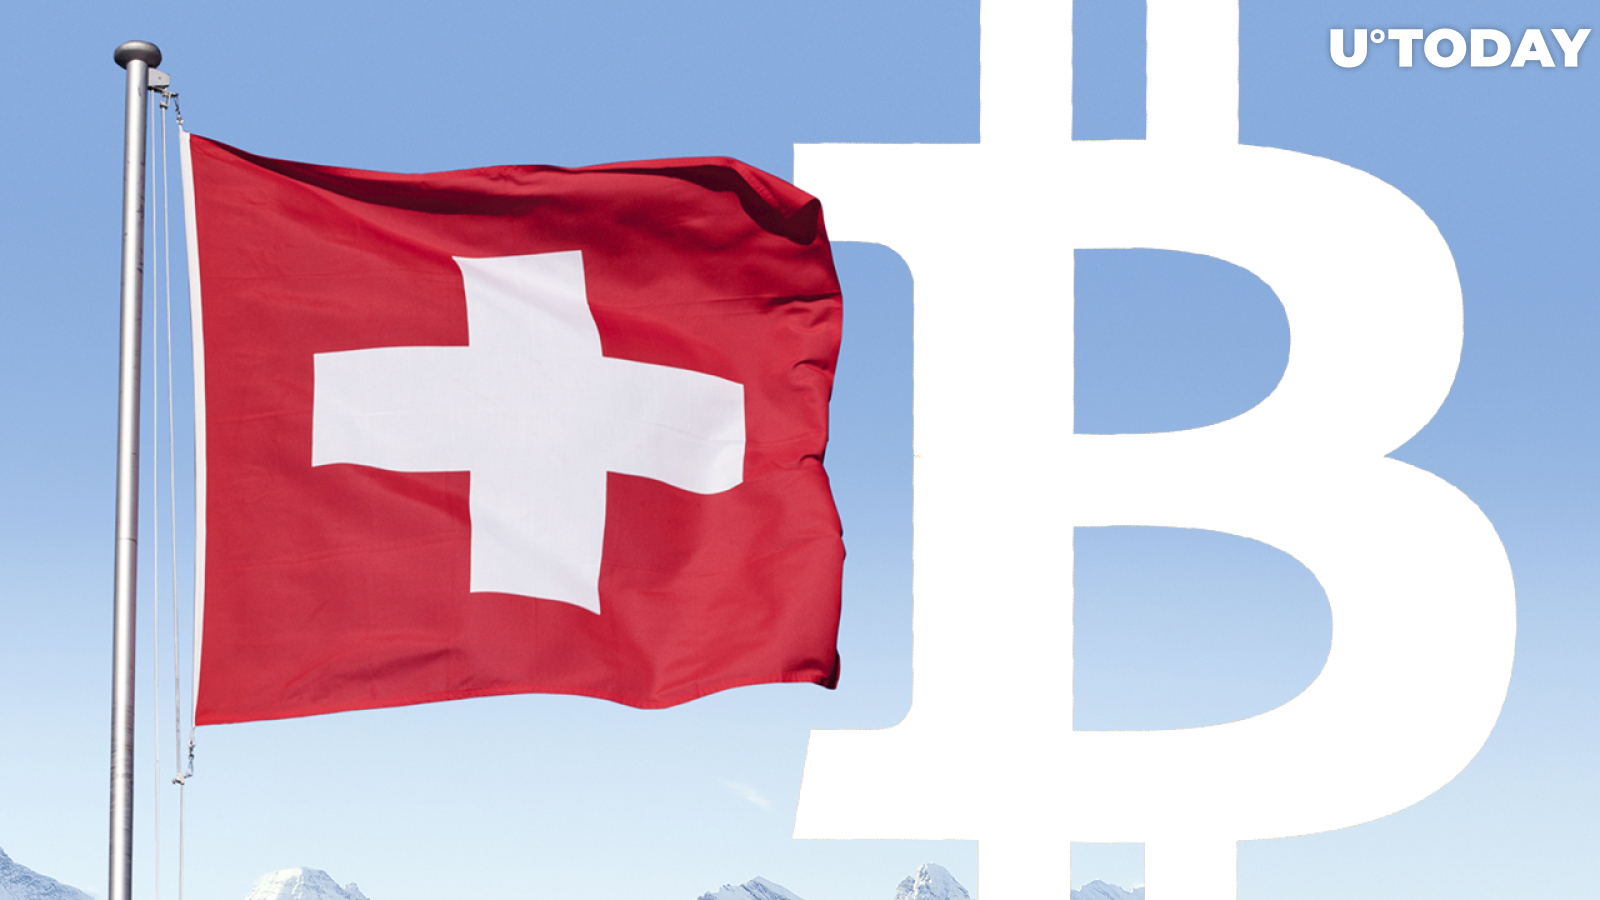 Bitcoin Doesn't Meet Requirements of Reserve Currency: Swiss National Bank Chairman